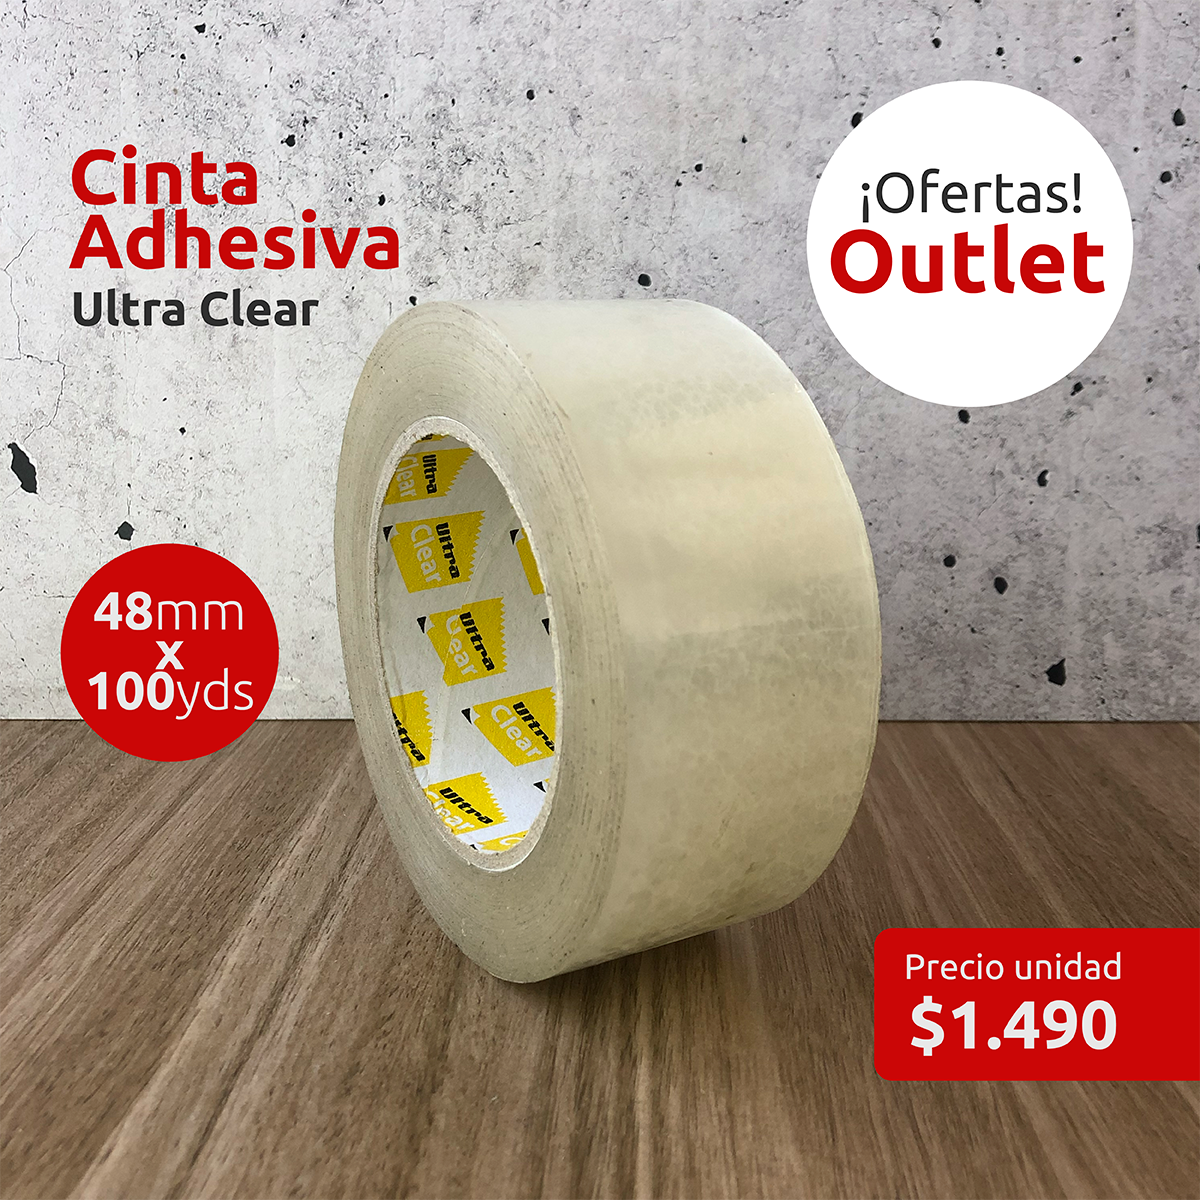 OUTLET - Cinta adhesiva UltraClear